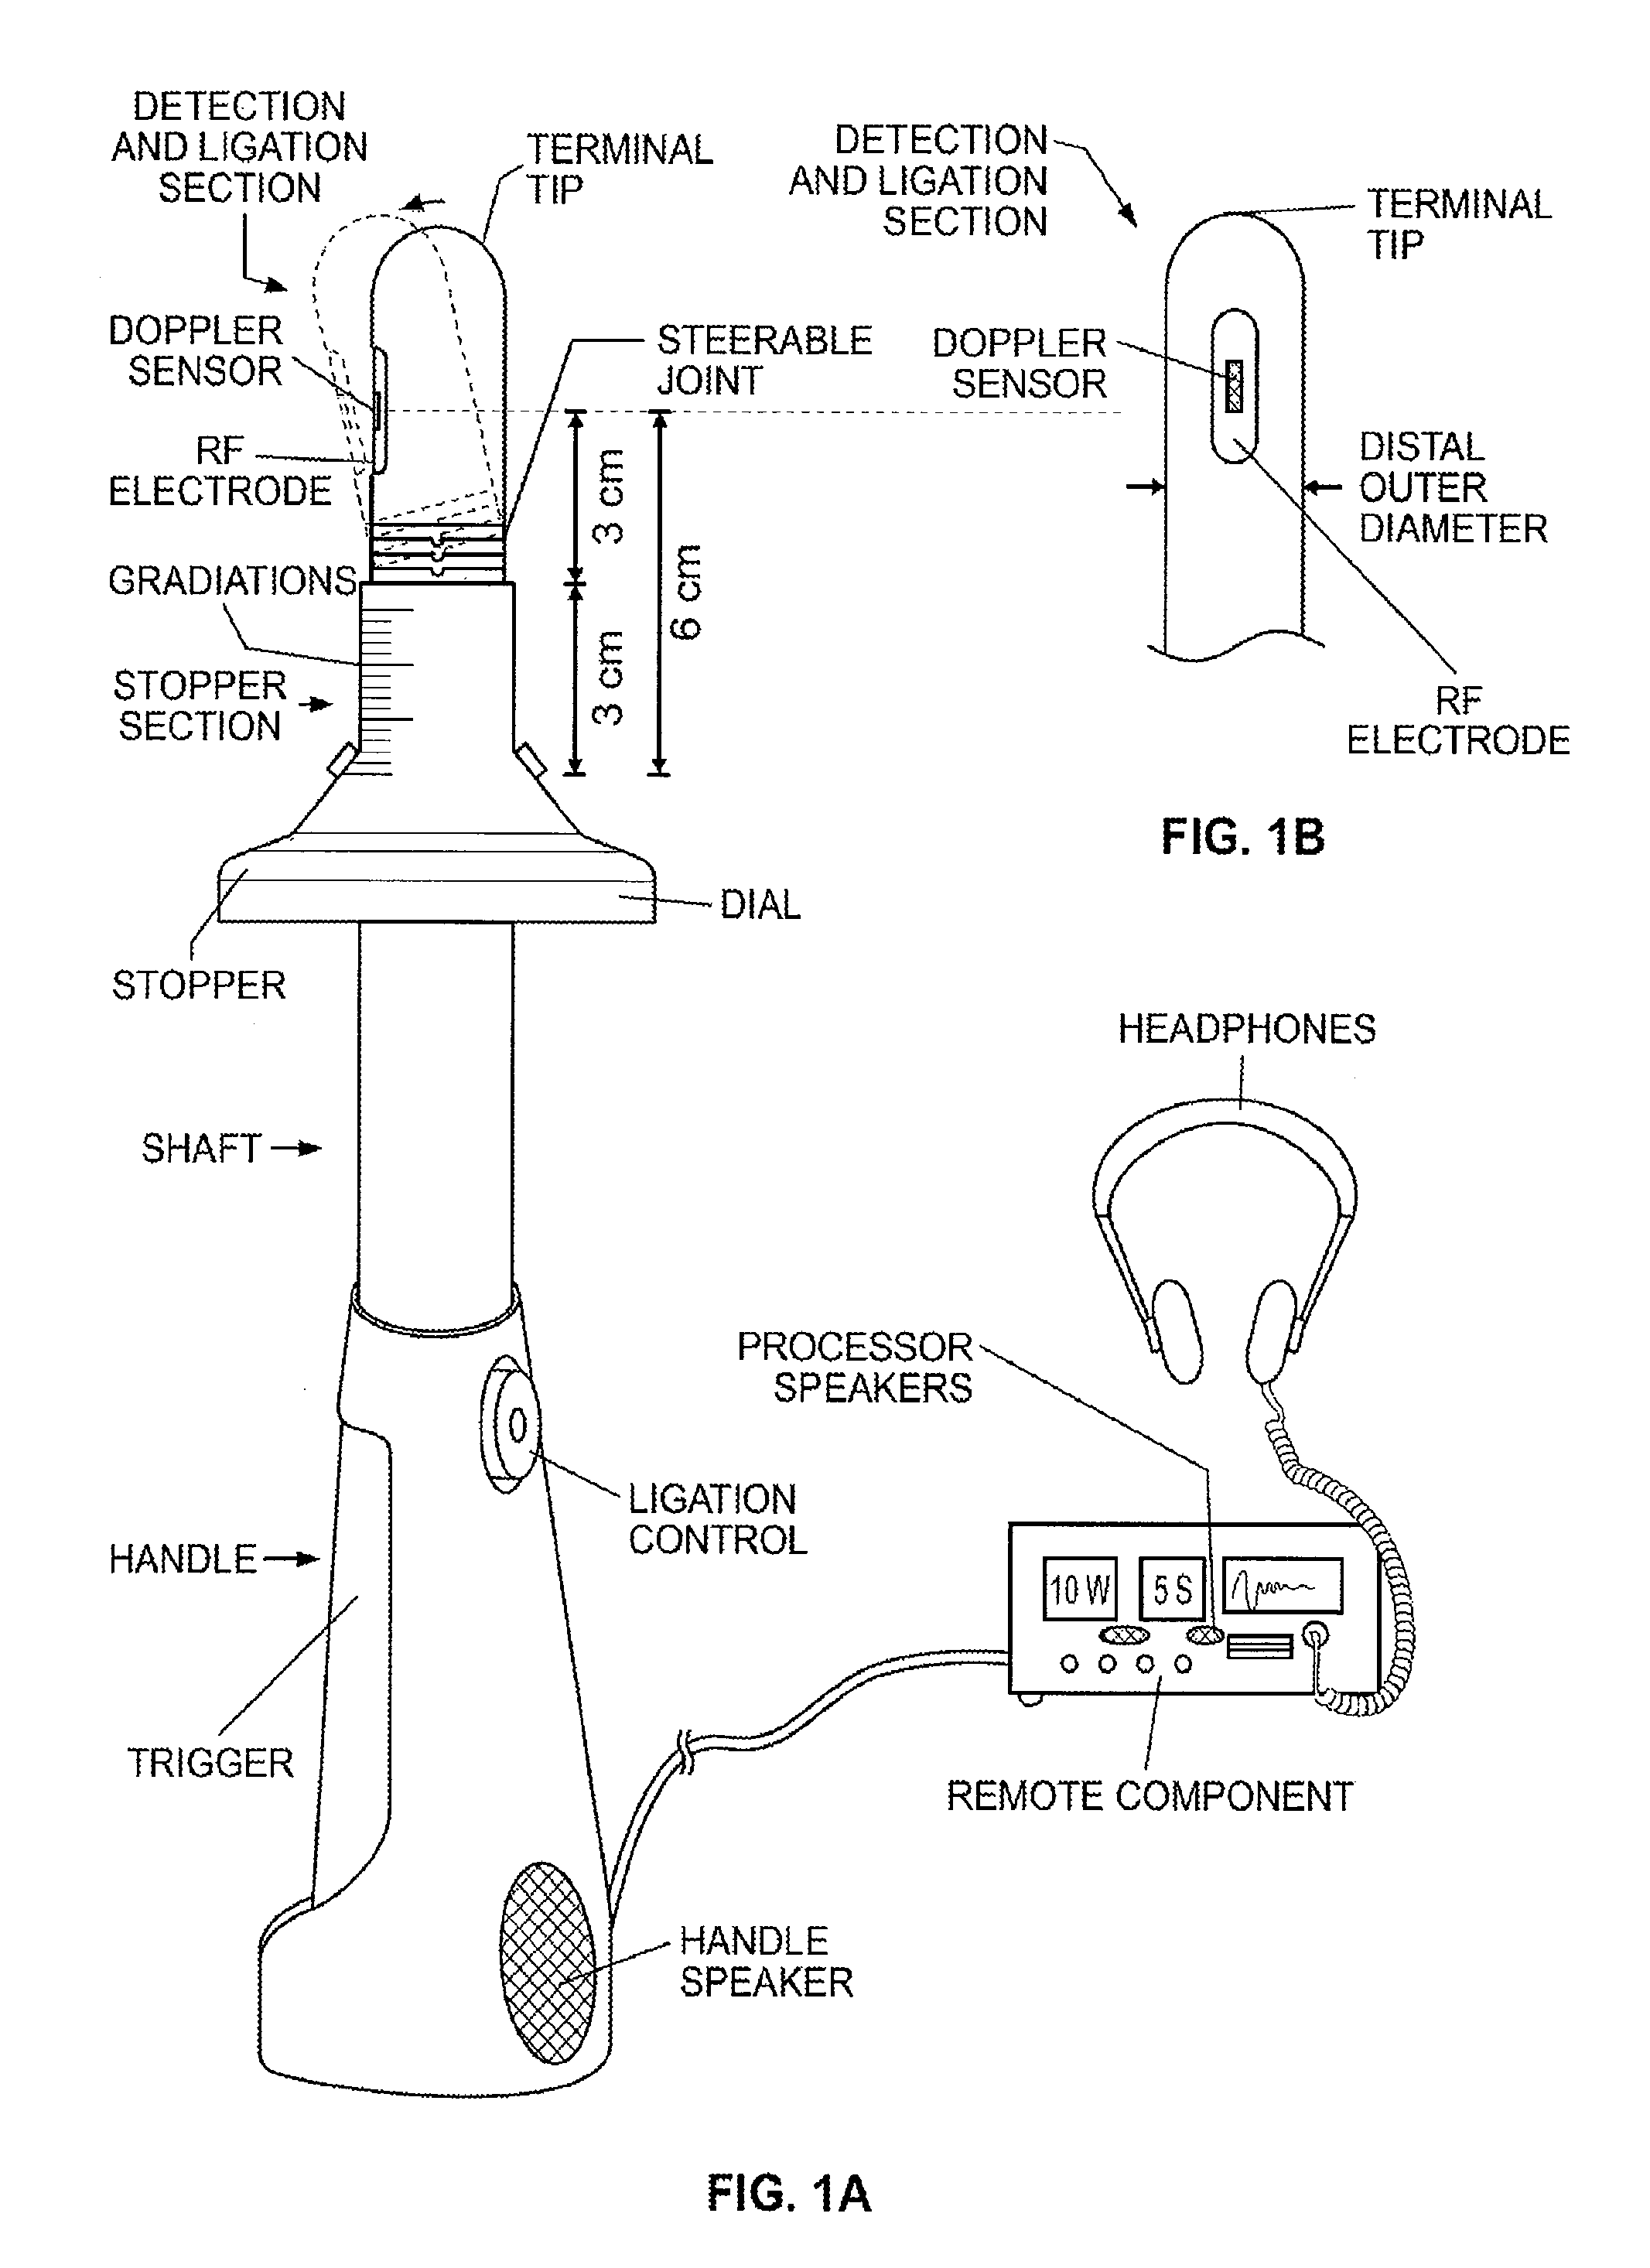 Closure device and method